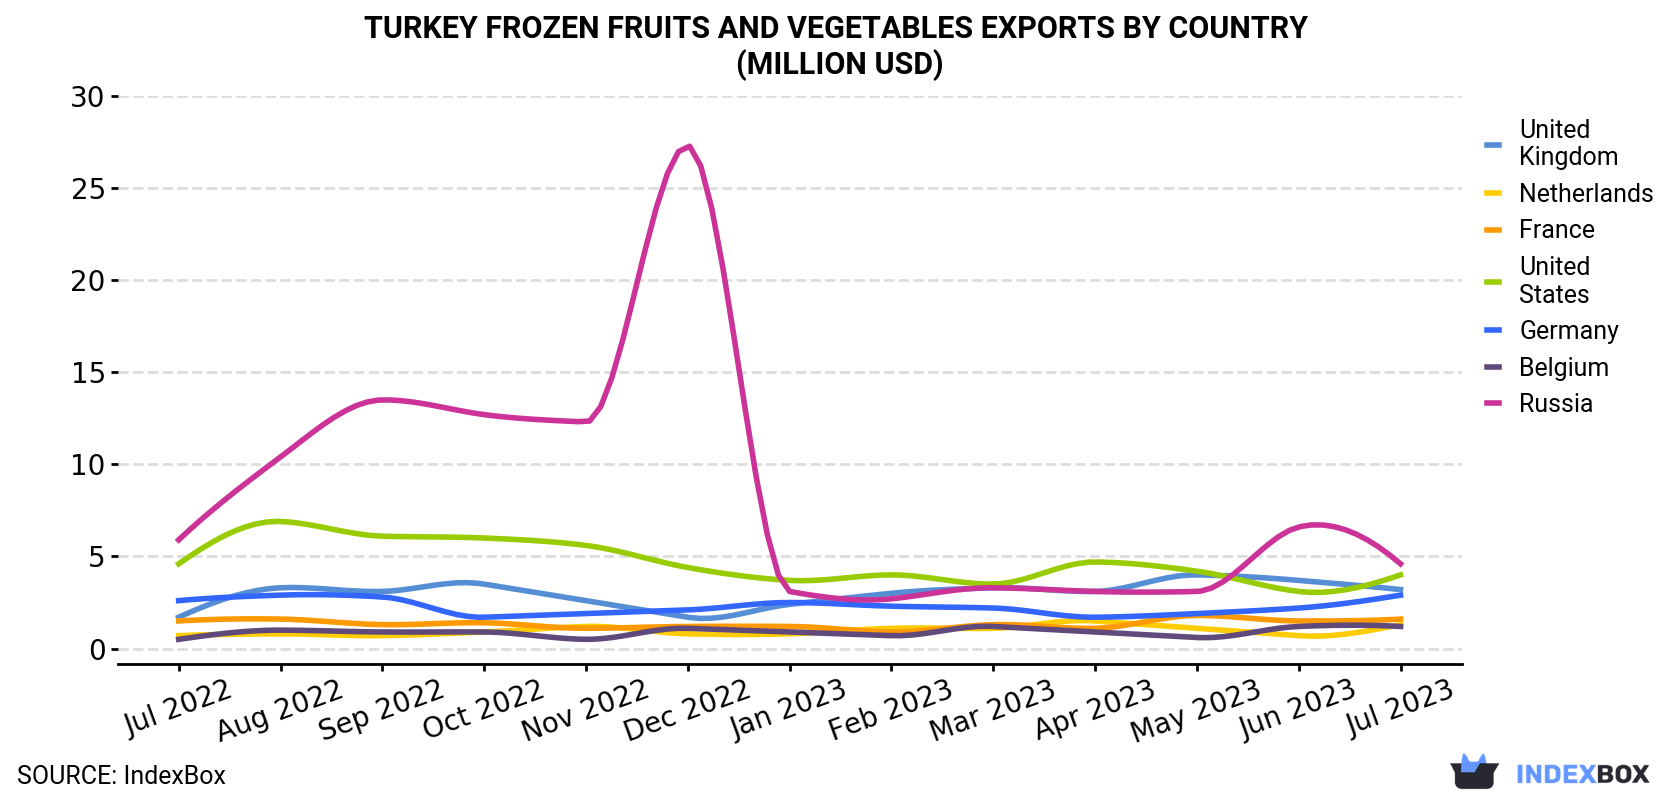 Turkey Frozen Fruits And Vegetables Exports By Country (Million USD)